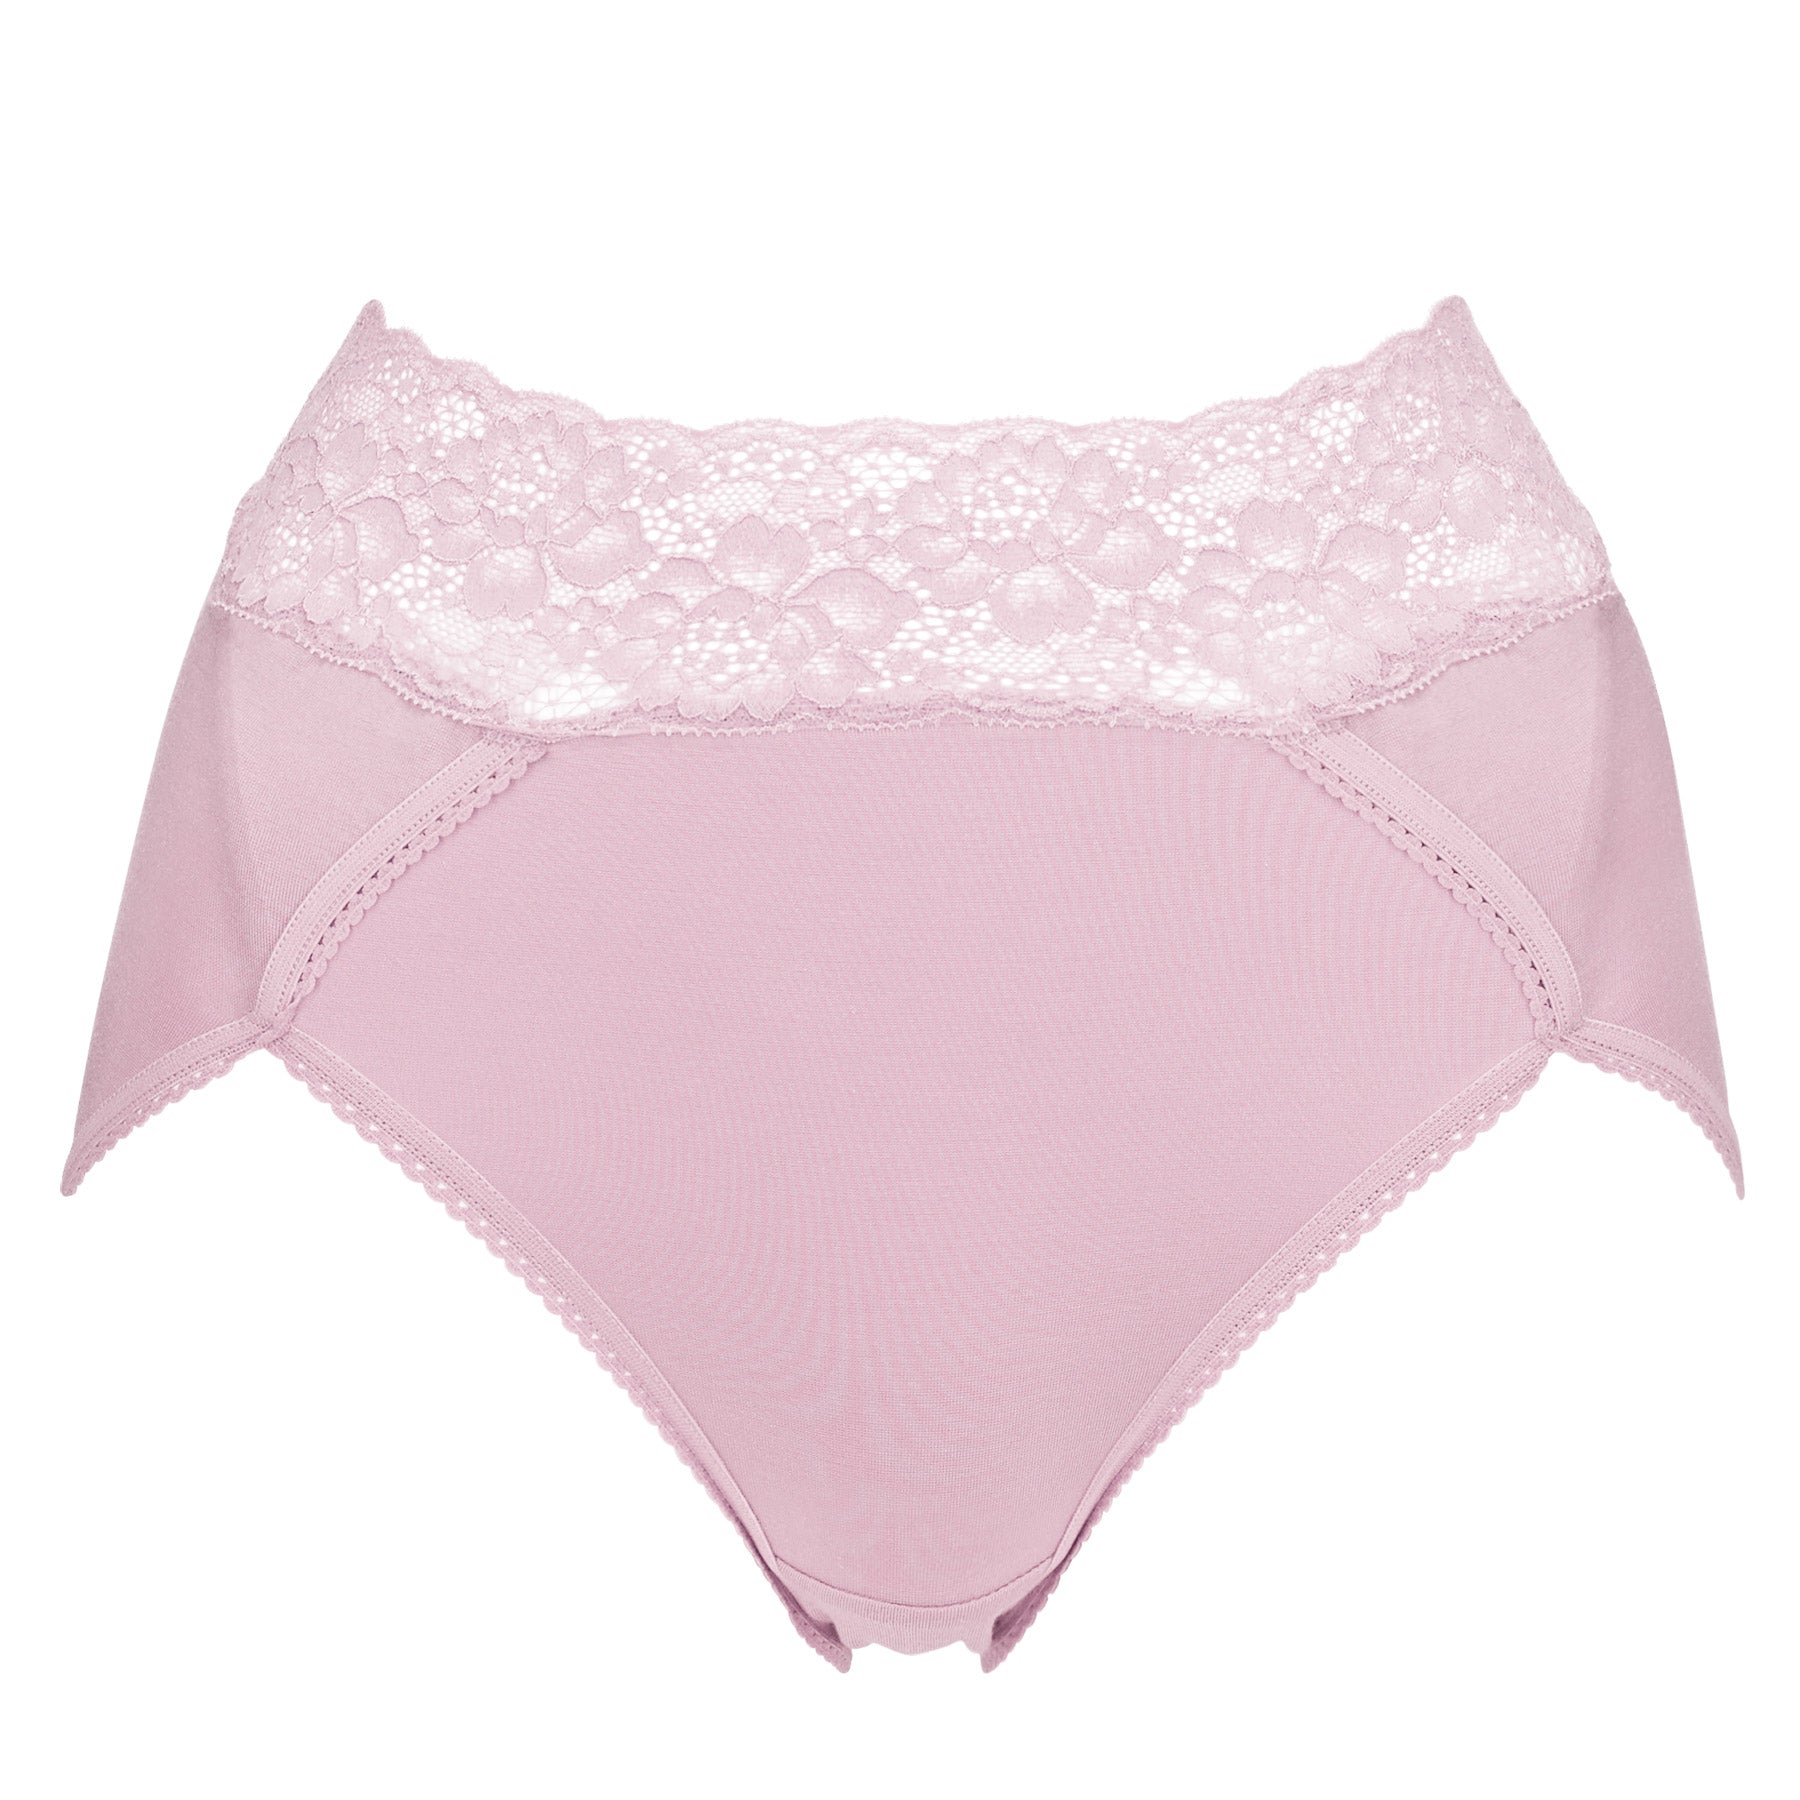 Lace High-Waist French-Cut Shaping Panty